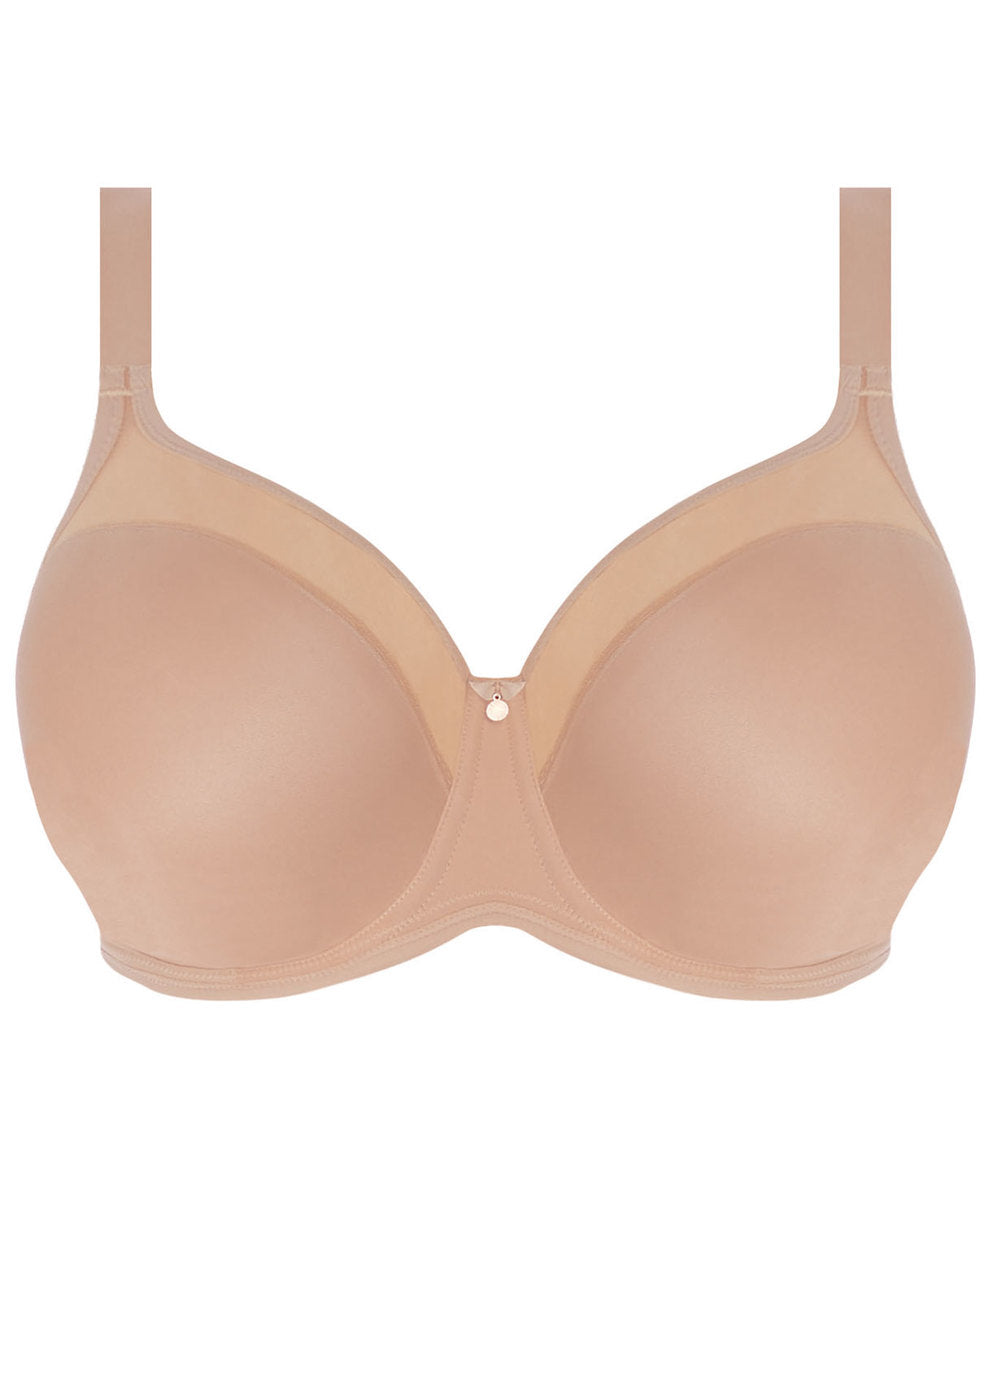 product view of Elomi Smooth Molded Non-Padded Underwire Bra in sahara